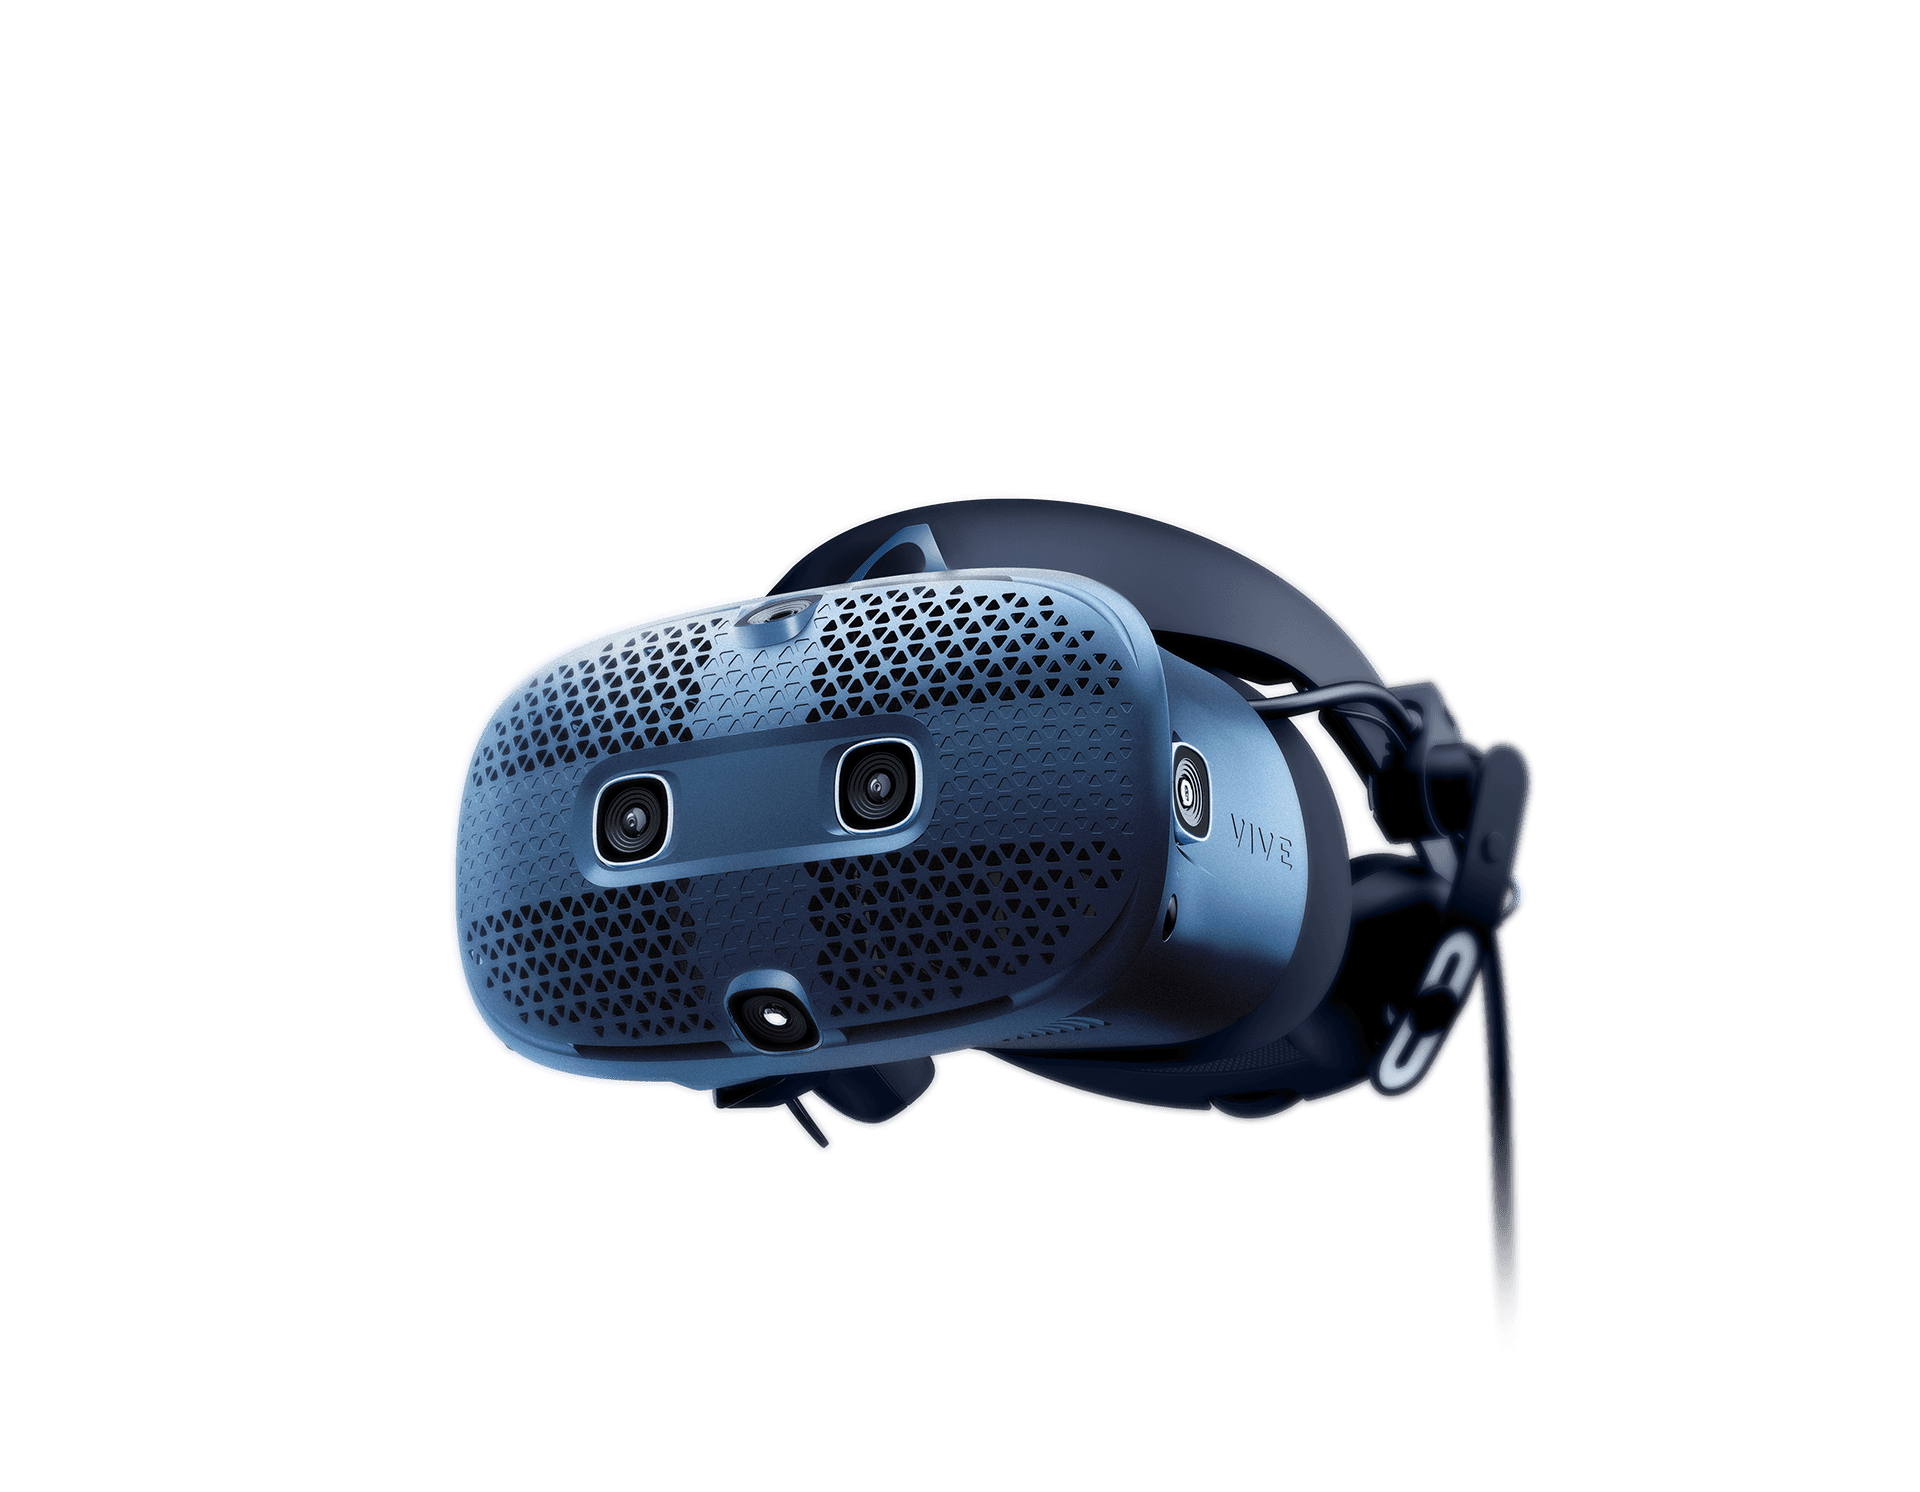 VIVE Cosmos VR headset with inside-out tracking illuminated in lights.